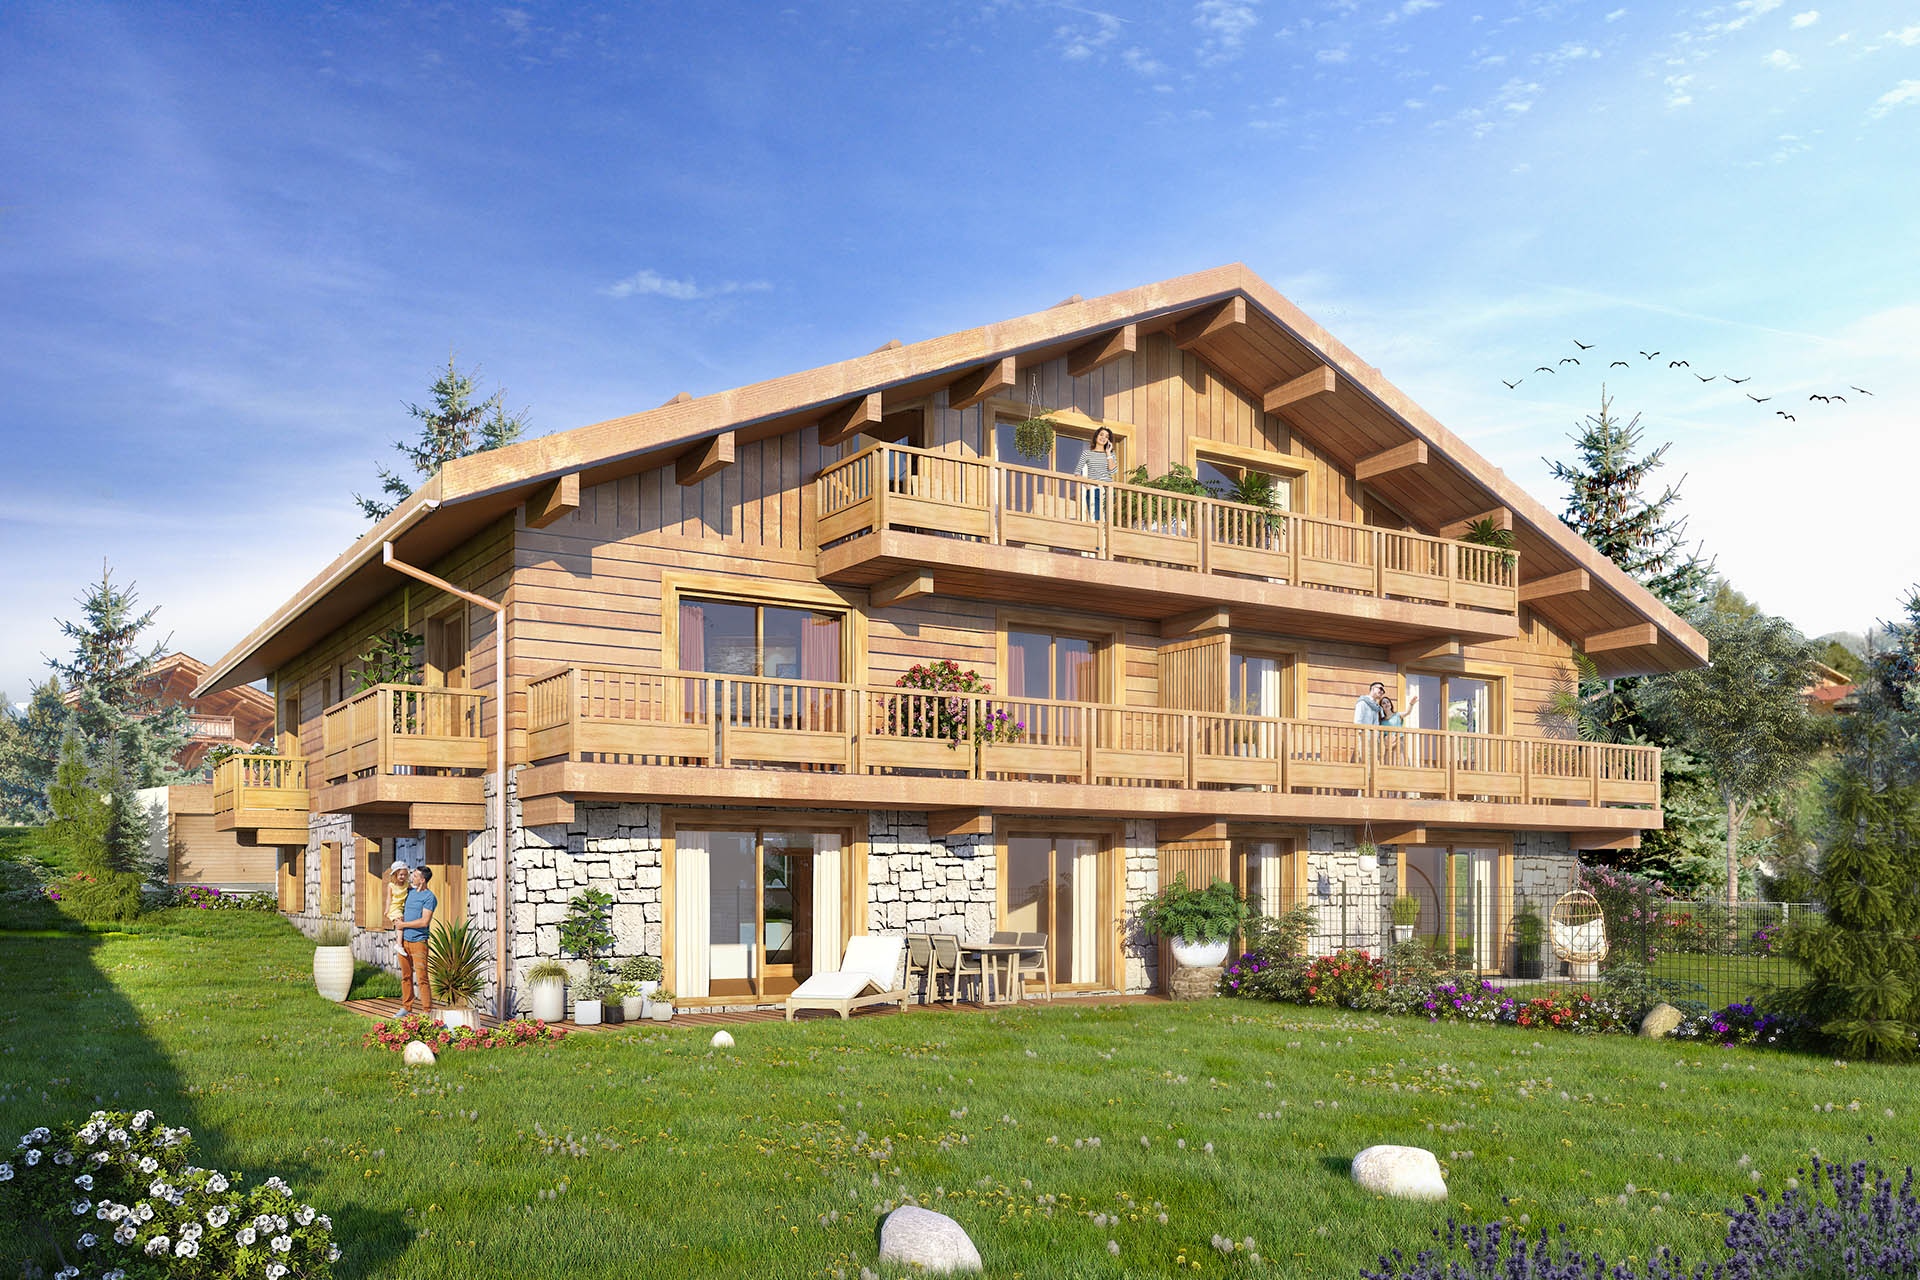 EXCLUSIVE RESIDENCE OVERLOOKING THE MONT-BLANC